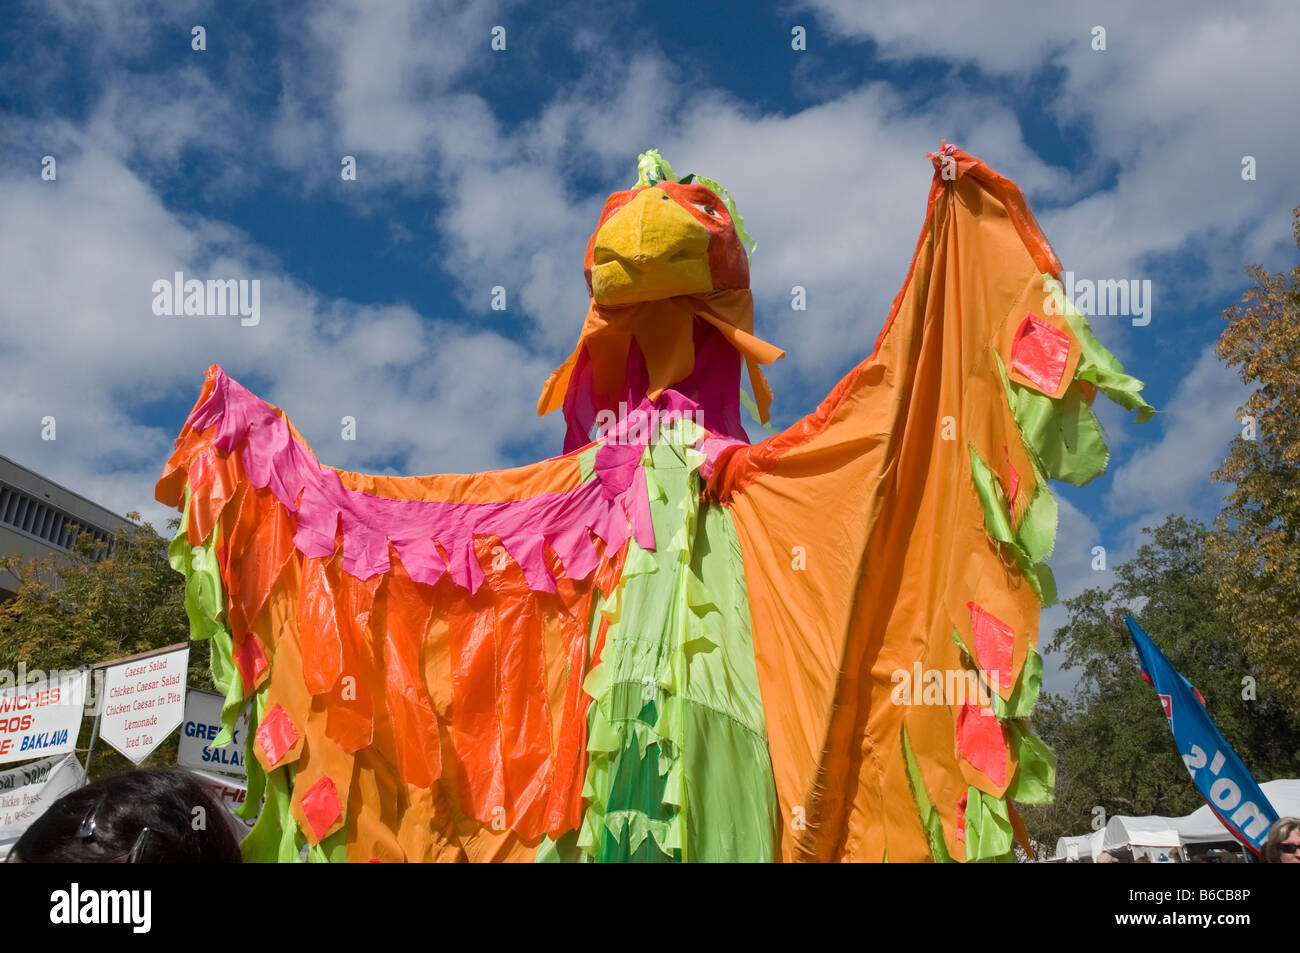 giant bird character mingles with the crowd at Downtown Arts Festival Gainesville Florida Stock Photo